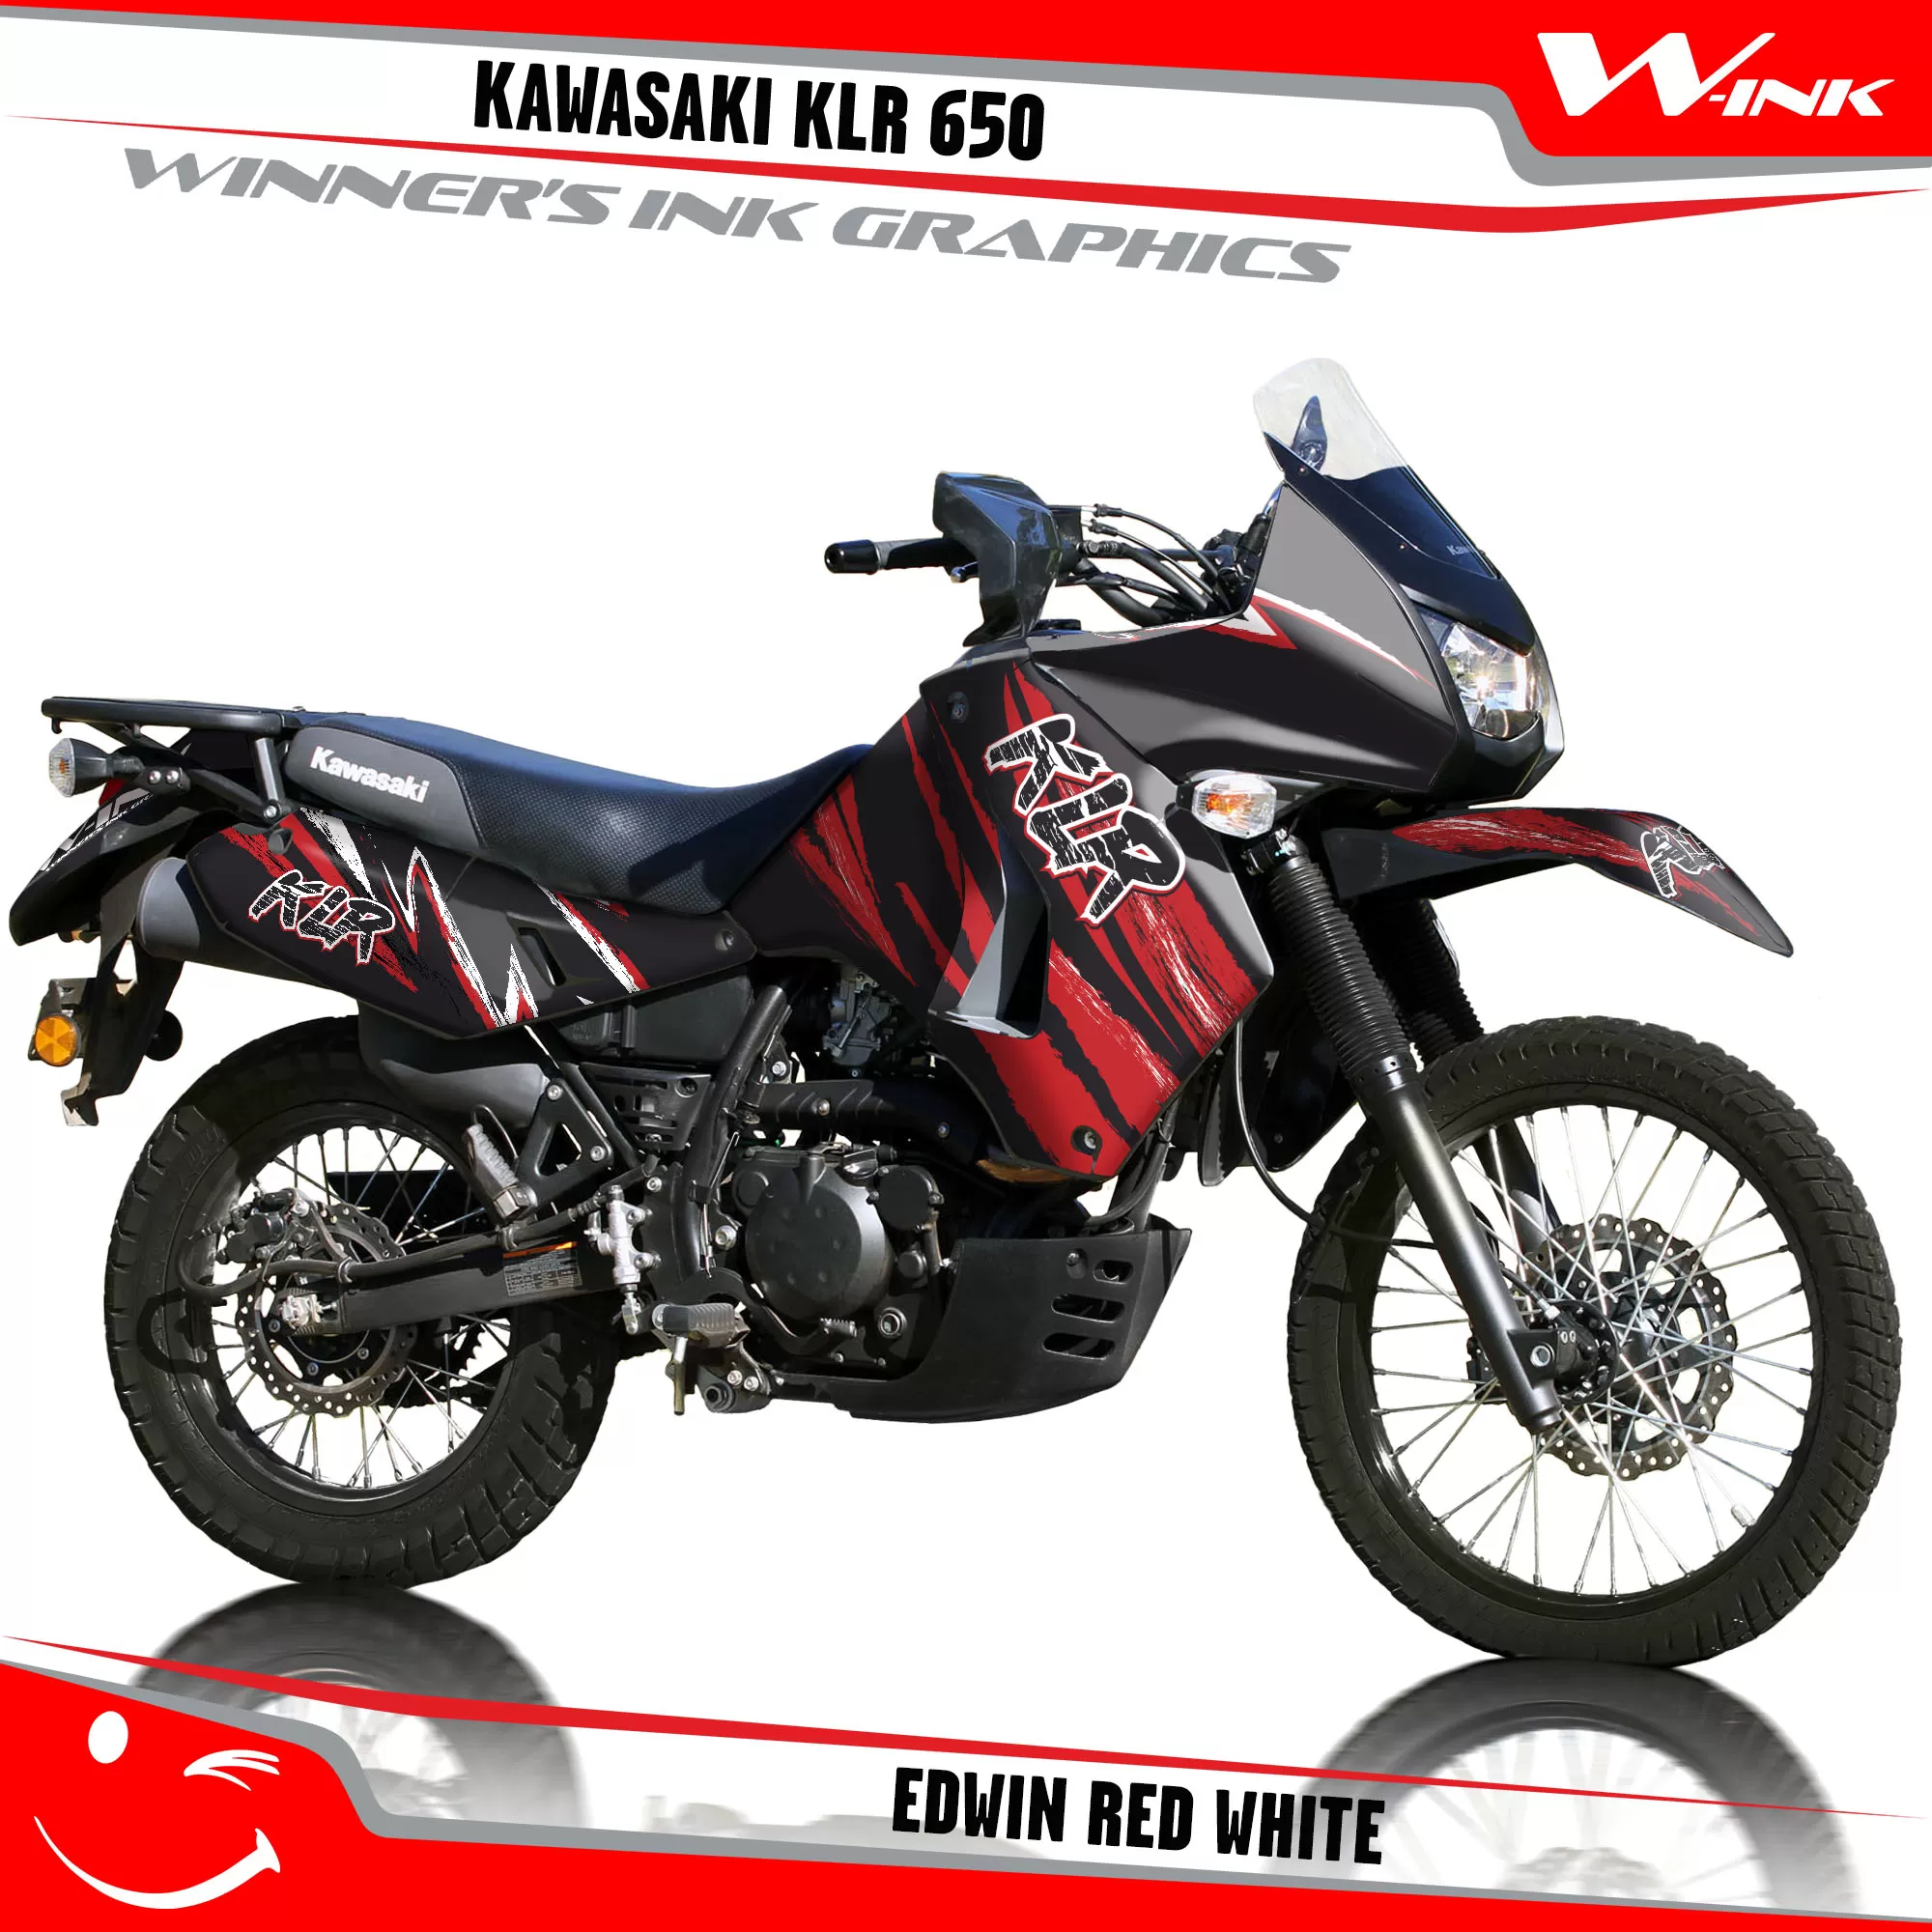 Kawasaki-KLR-650-2008-2009-2010-2011-2012-2013-2014-2015-2016-2017-2018-graphics-kit-and-decals-Edwin-Red-White